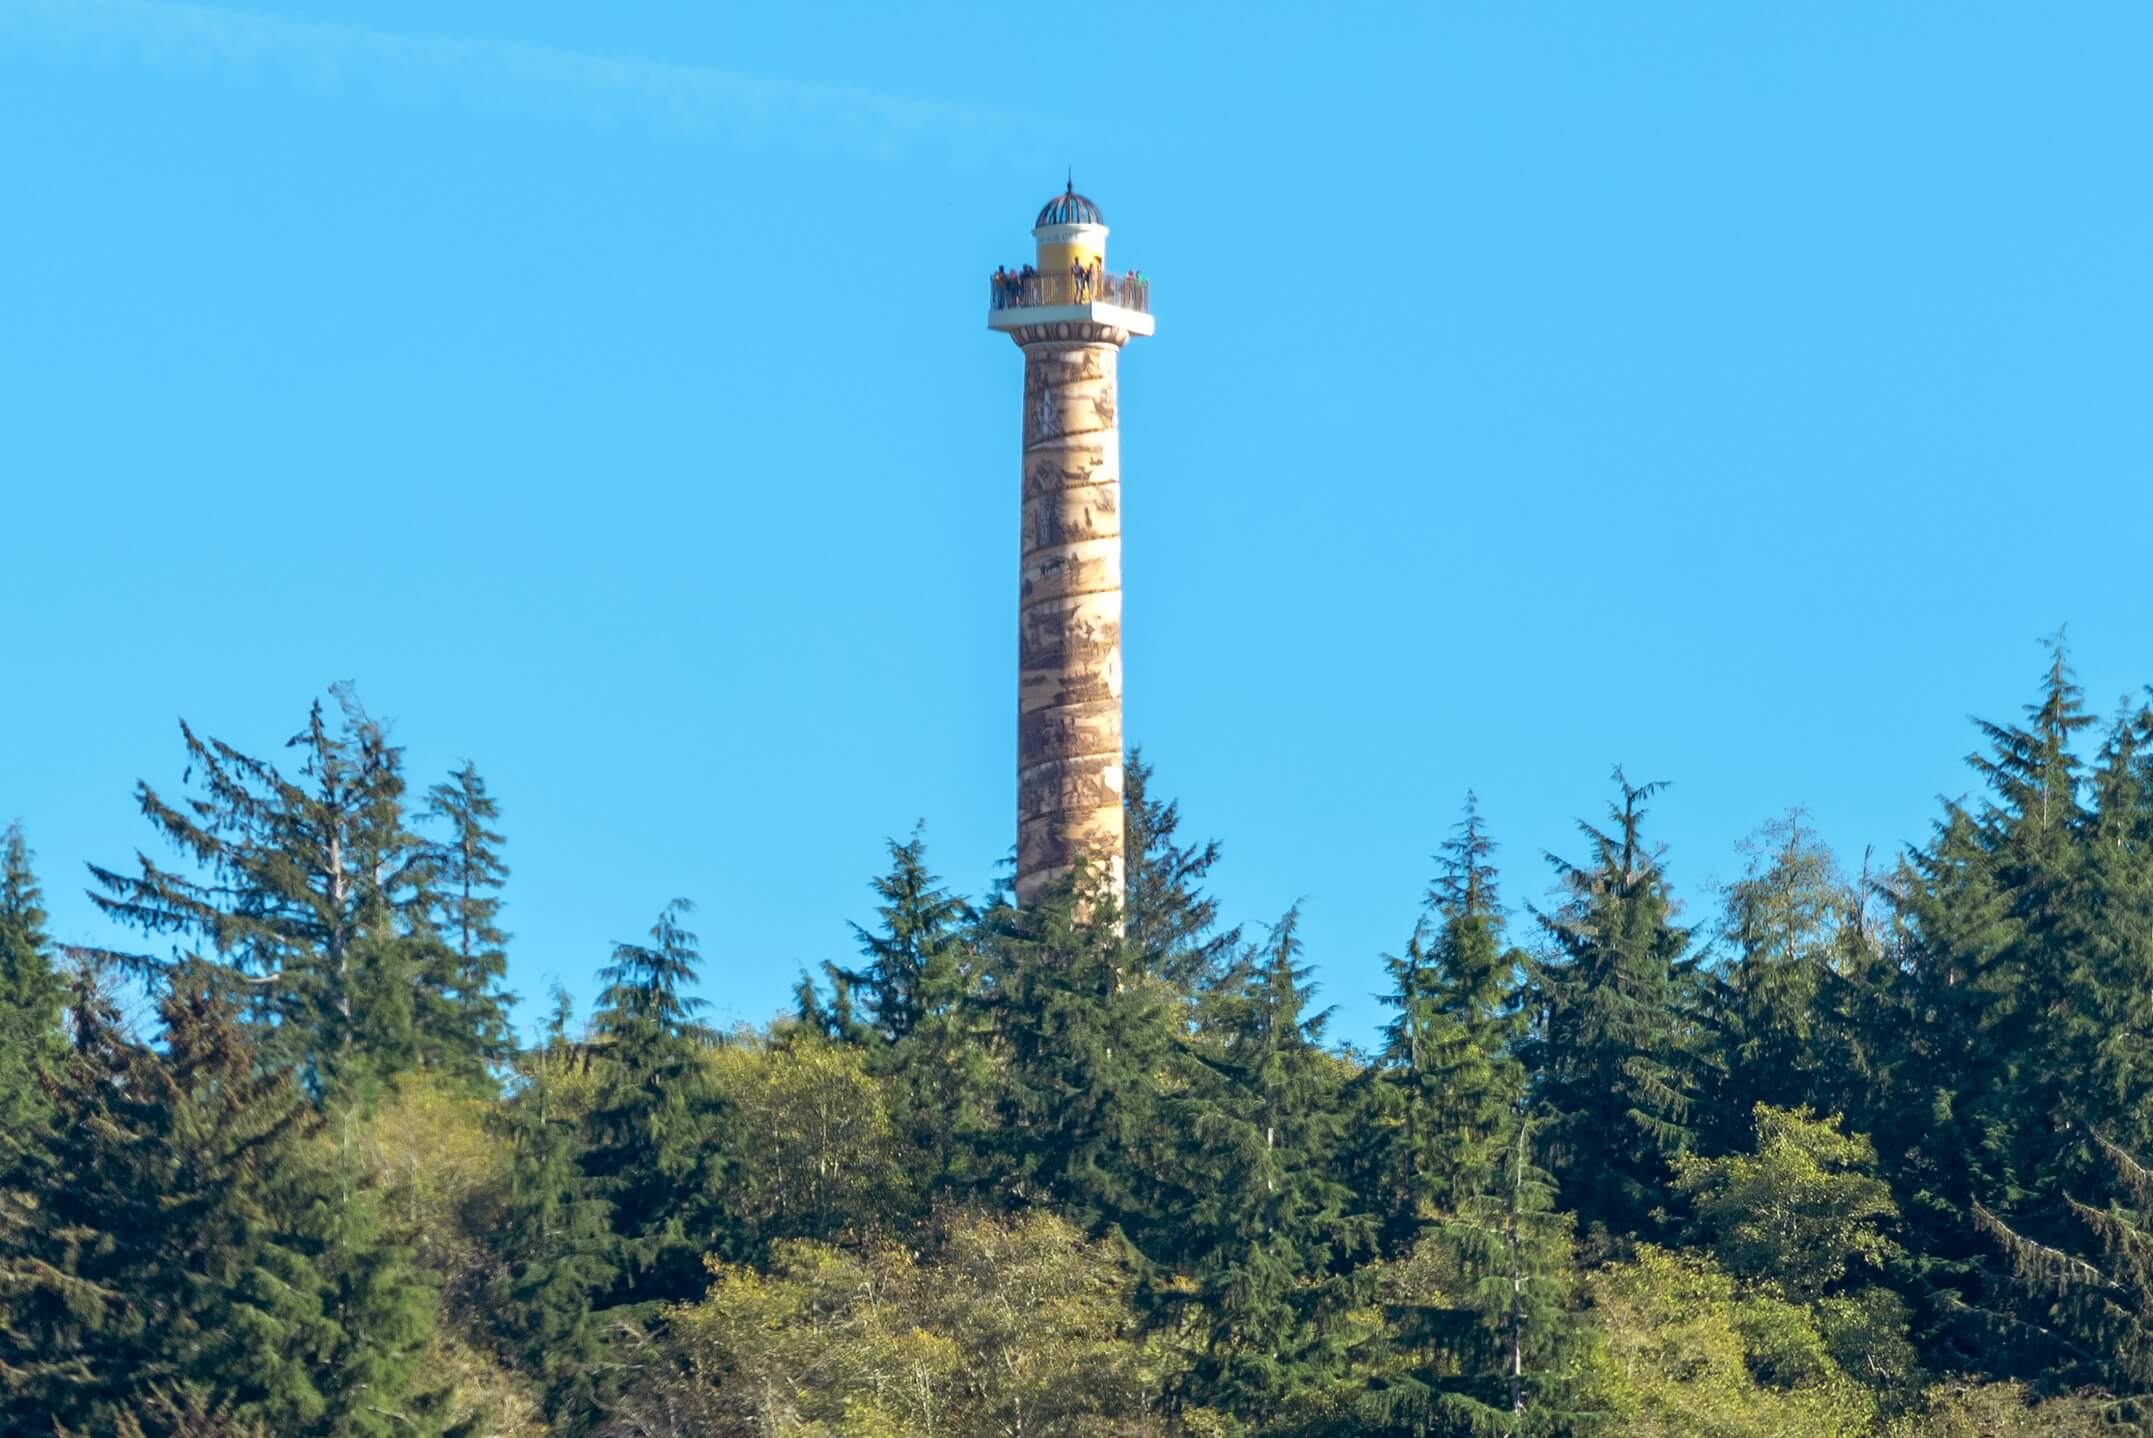 Astoria Oregon has many attractions and museum like the Astoria Column, which is featured in this picture.